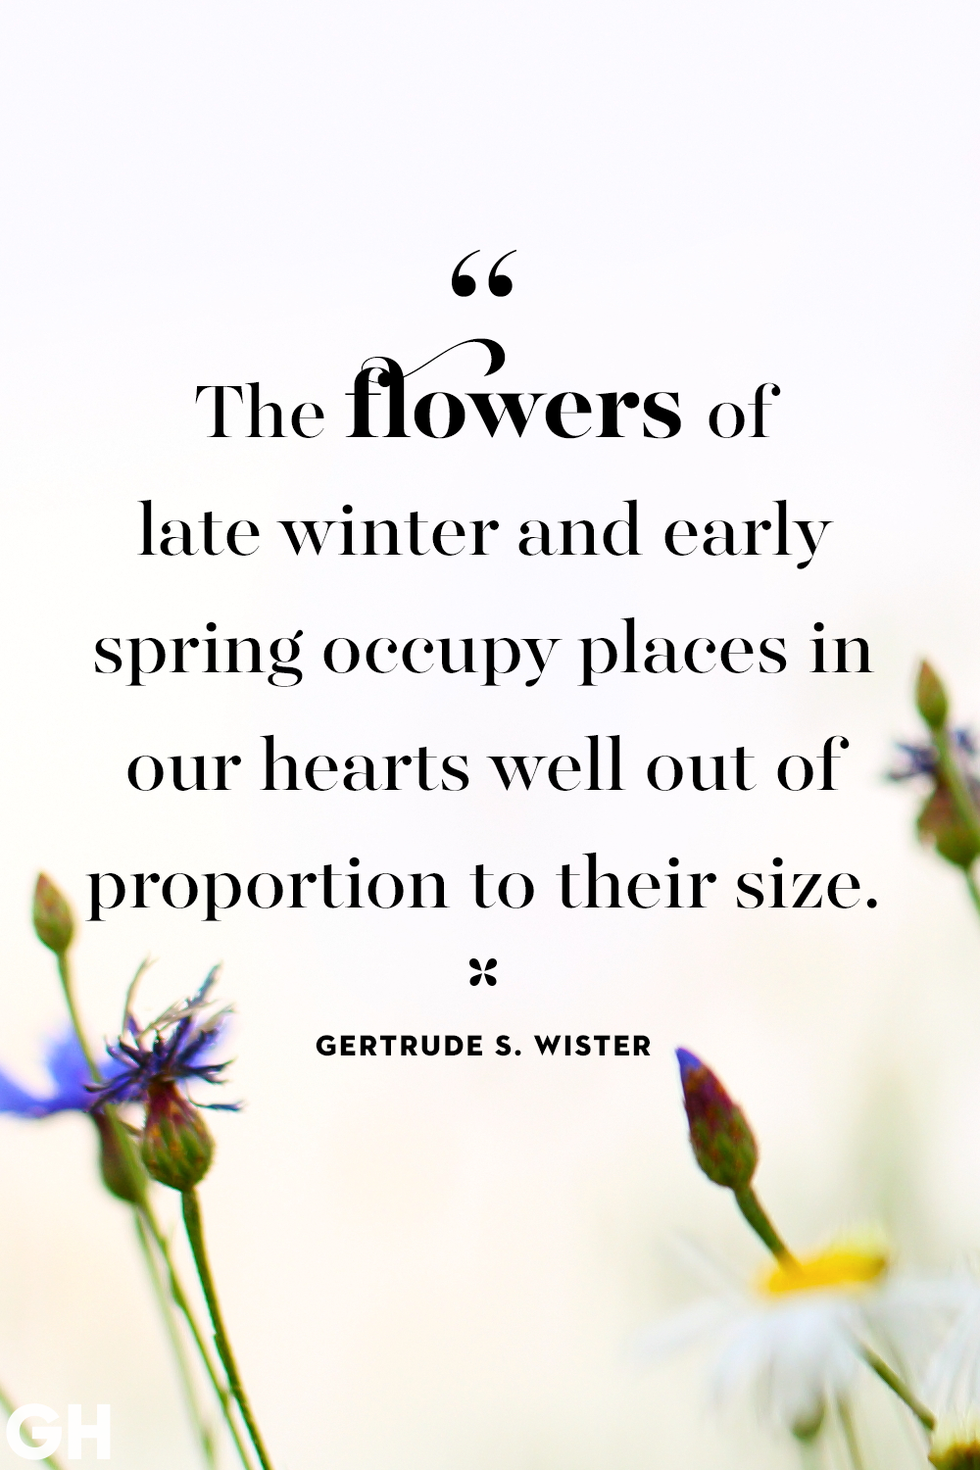 50 Best Spring Quotes - Happy and Poetic Quotes About Spring